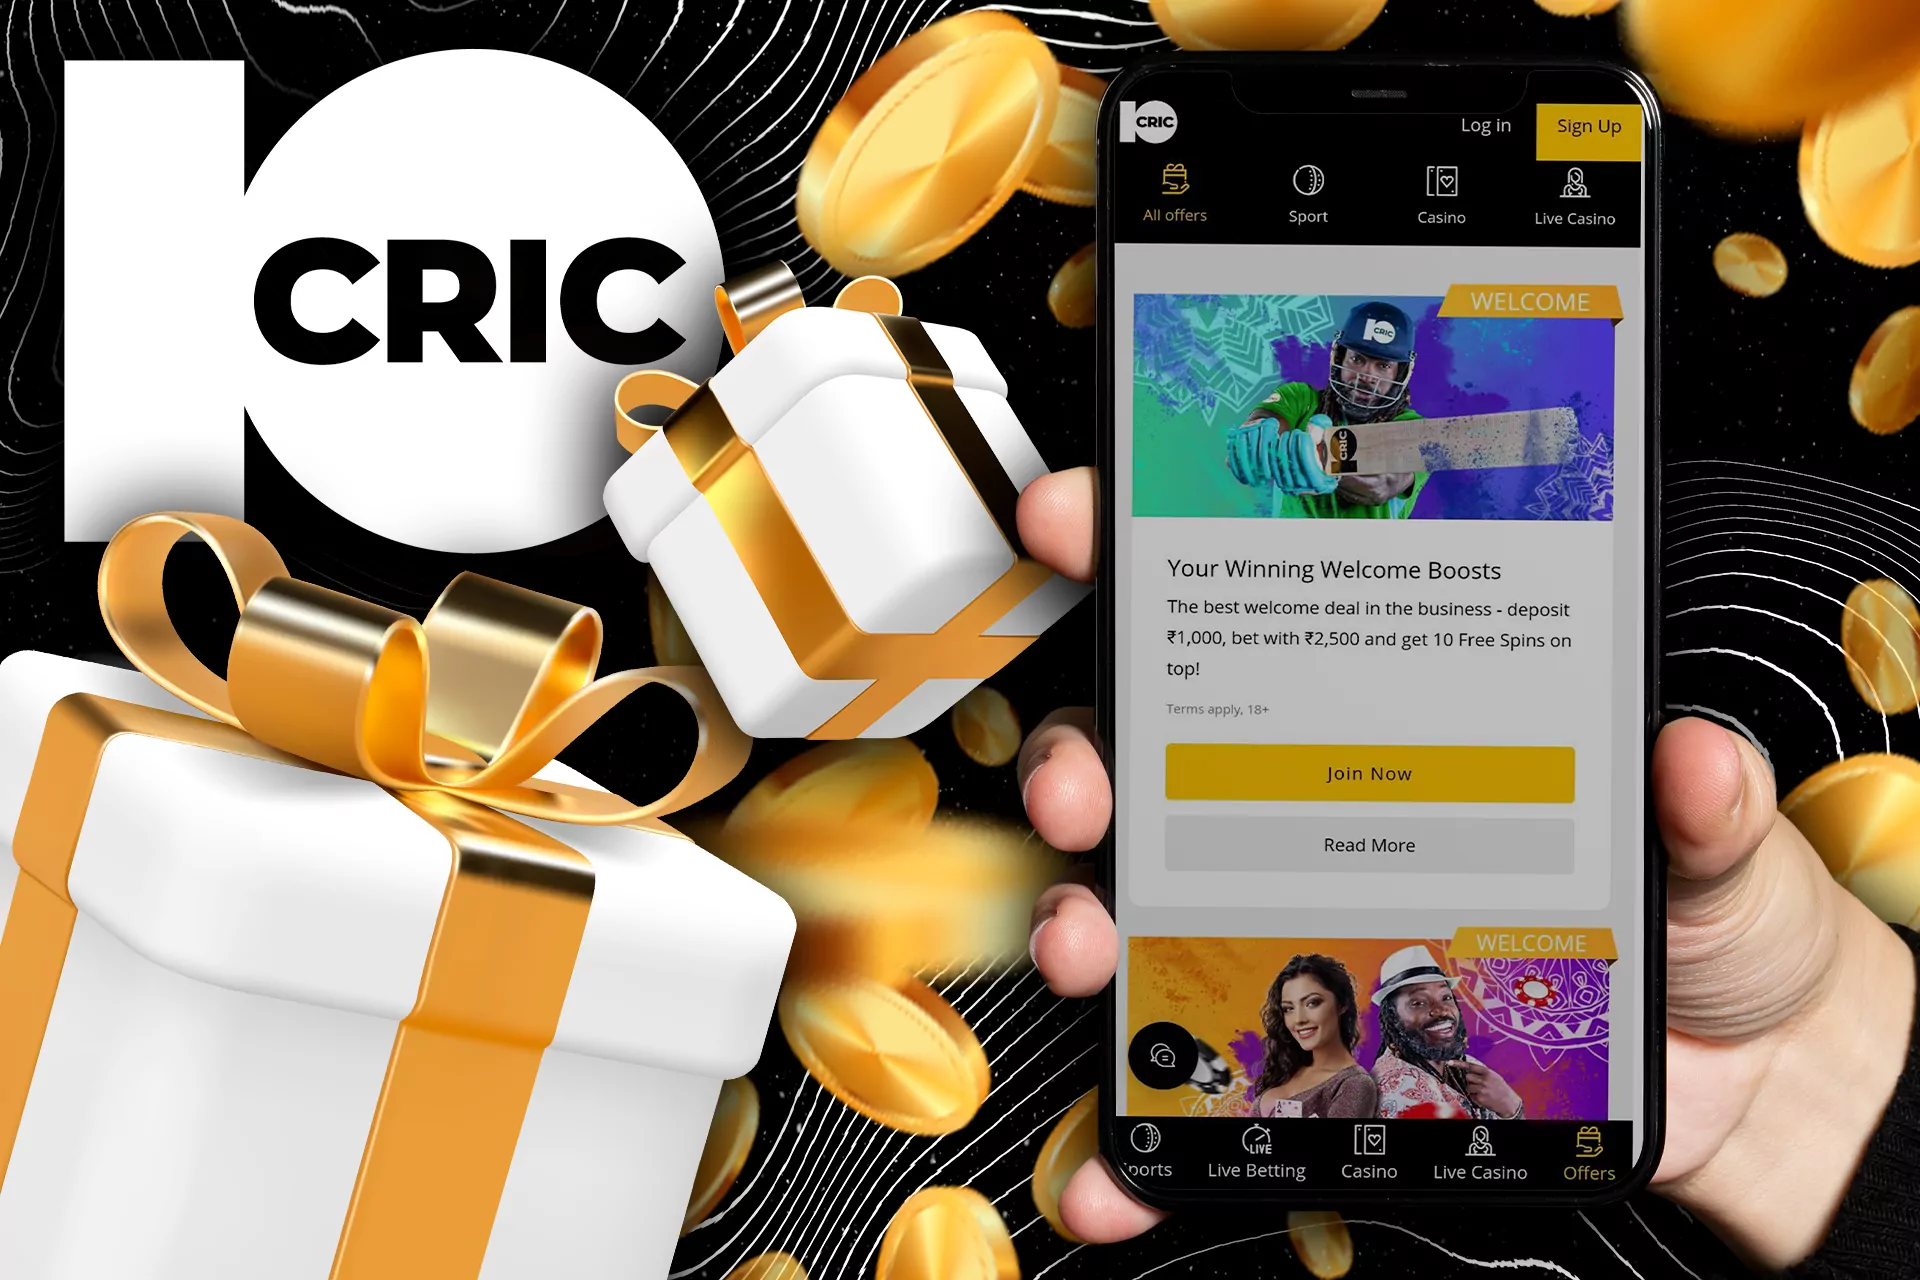 In the official app of 10Cric, you can find all the same available bonuses and promotions from the bookie.